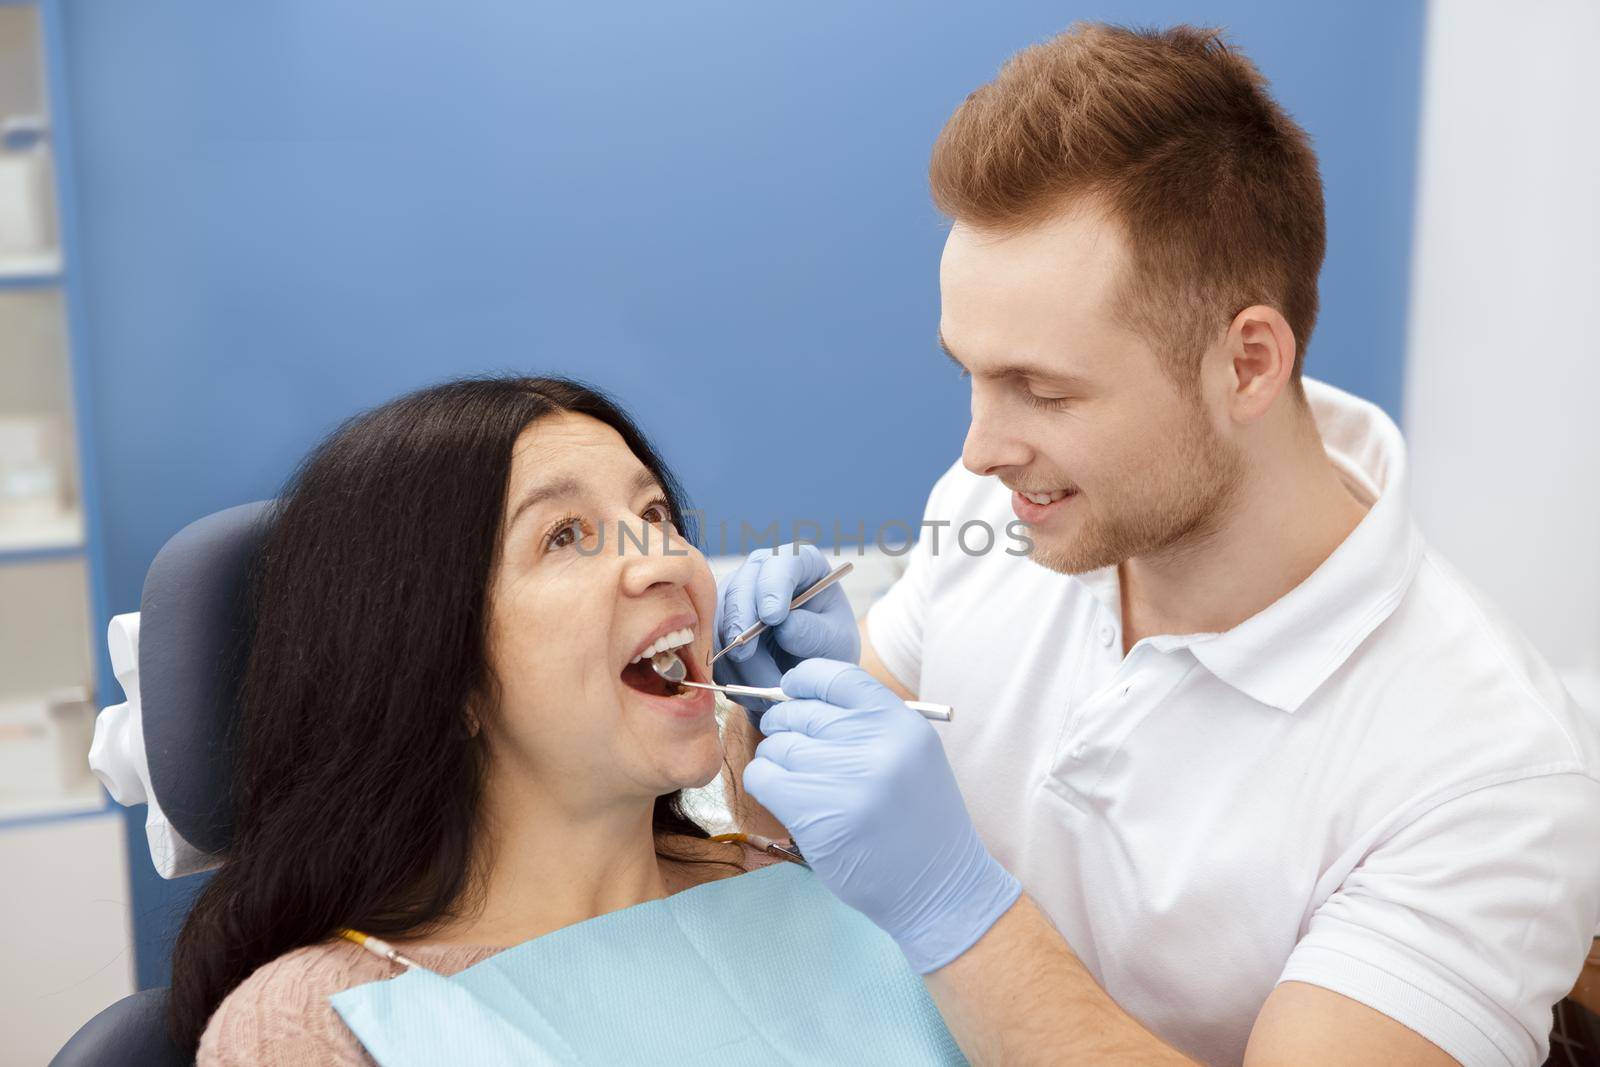 On the way to healthy. Young professional male dentist examining teeth of his senior female patient health medicine clinical insurance procedure dentistry dental checkup profession job professionalism